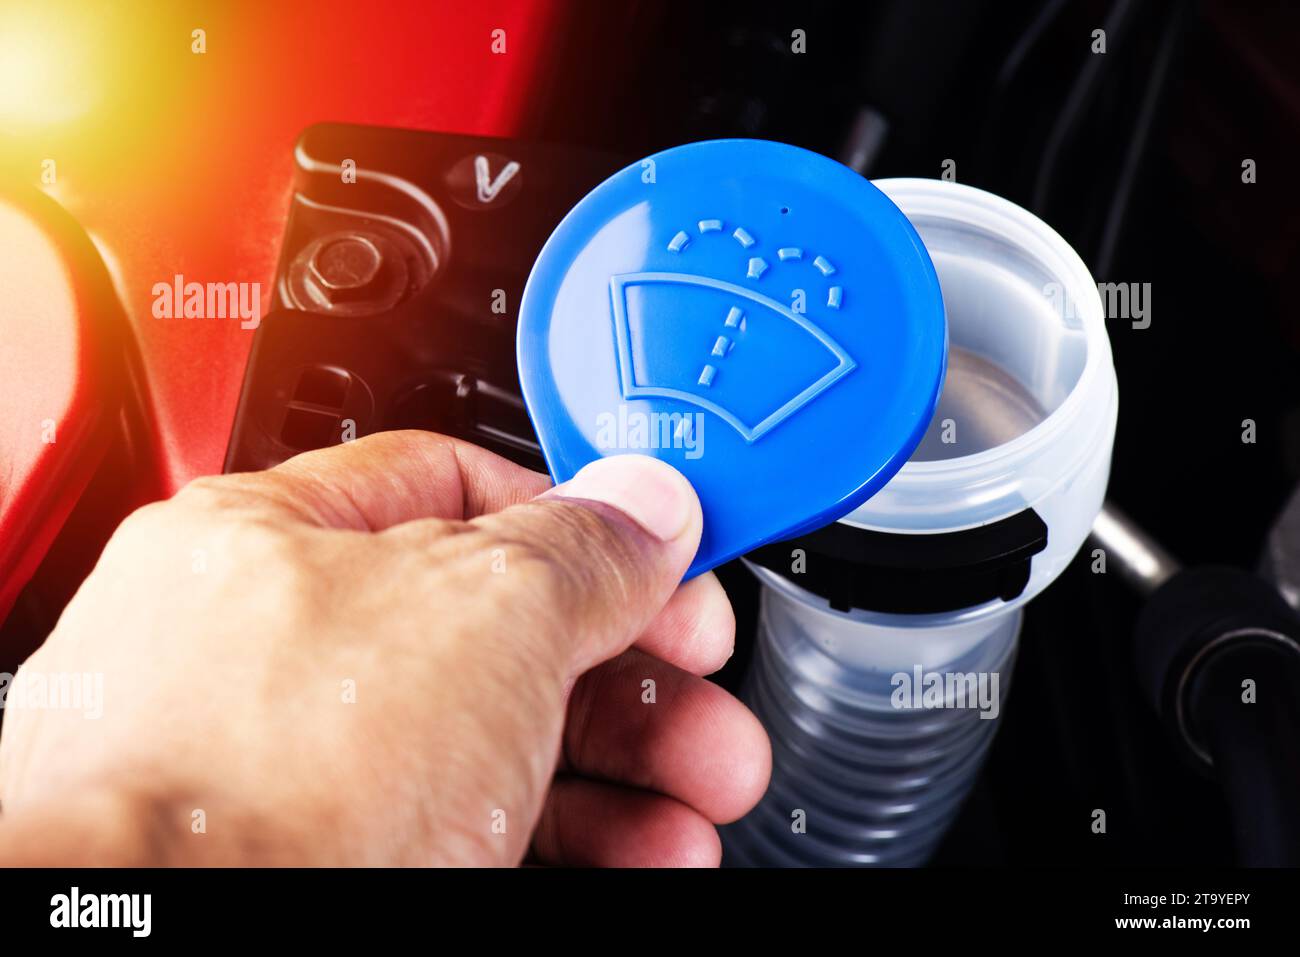 Blue cap of the tank for windshield washer fluid, close up Stock Photo -  Alamy